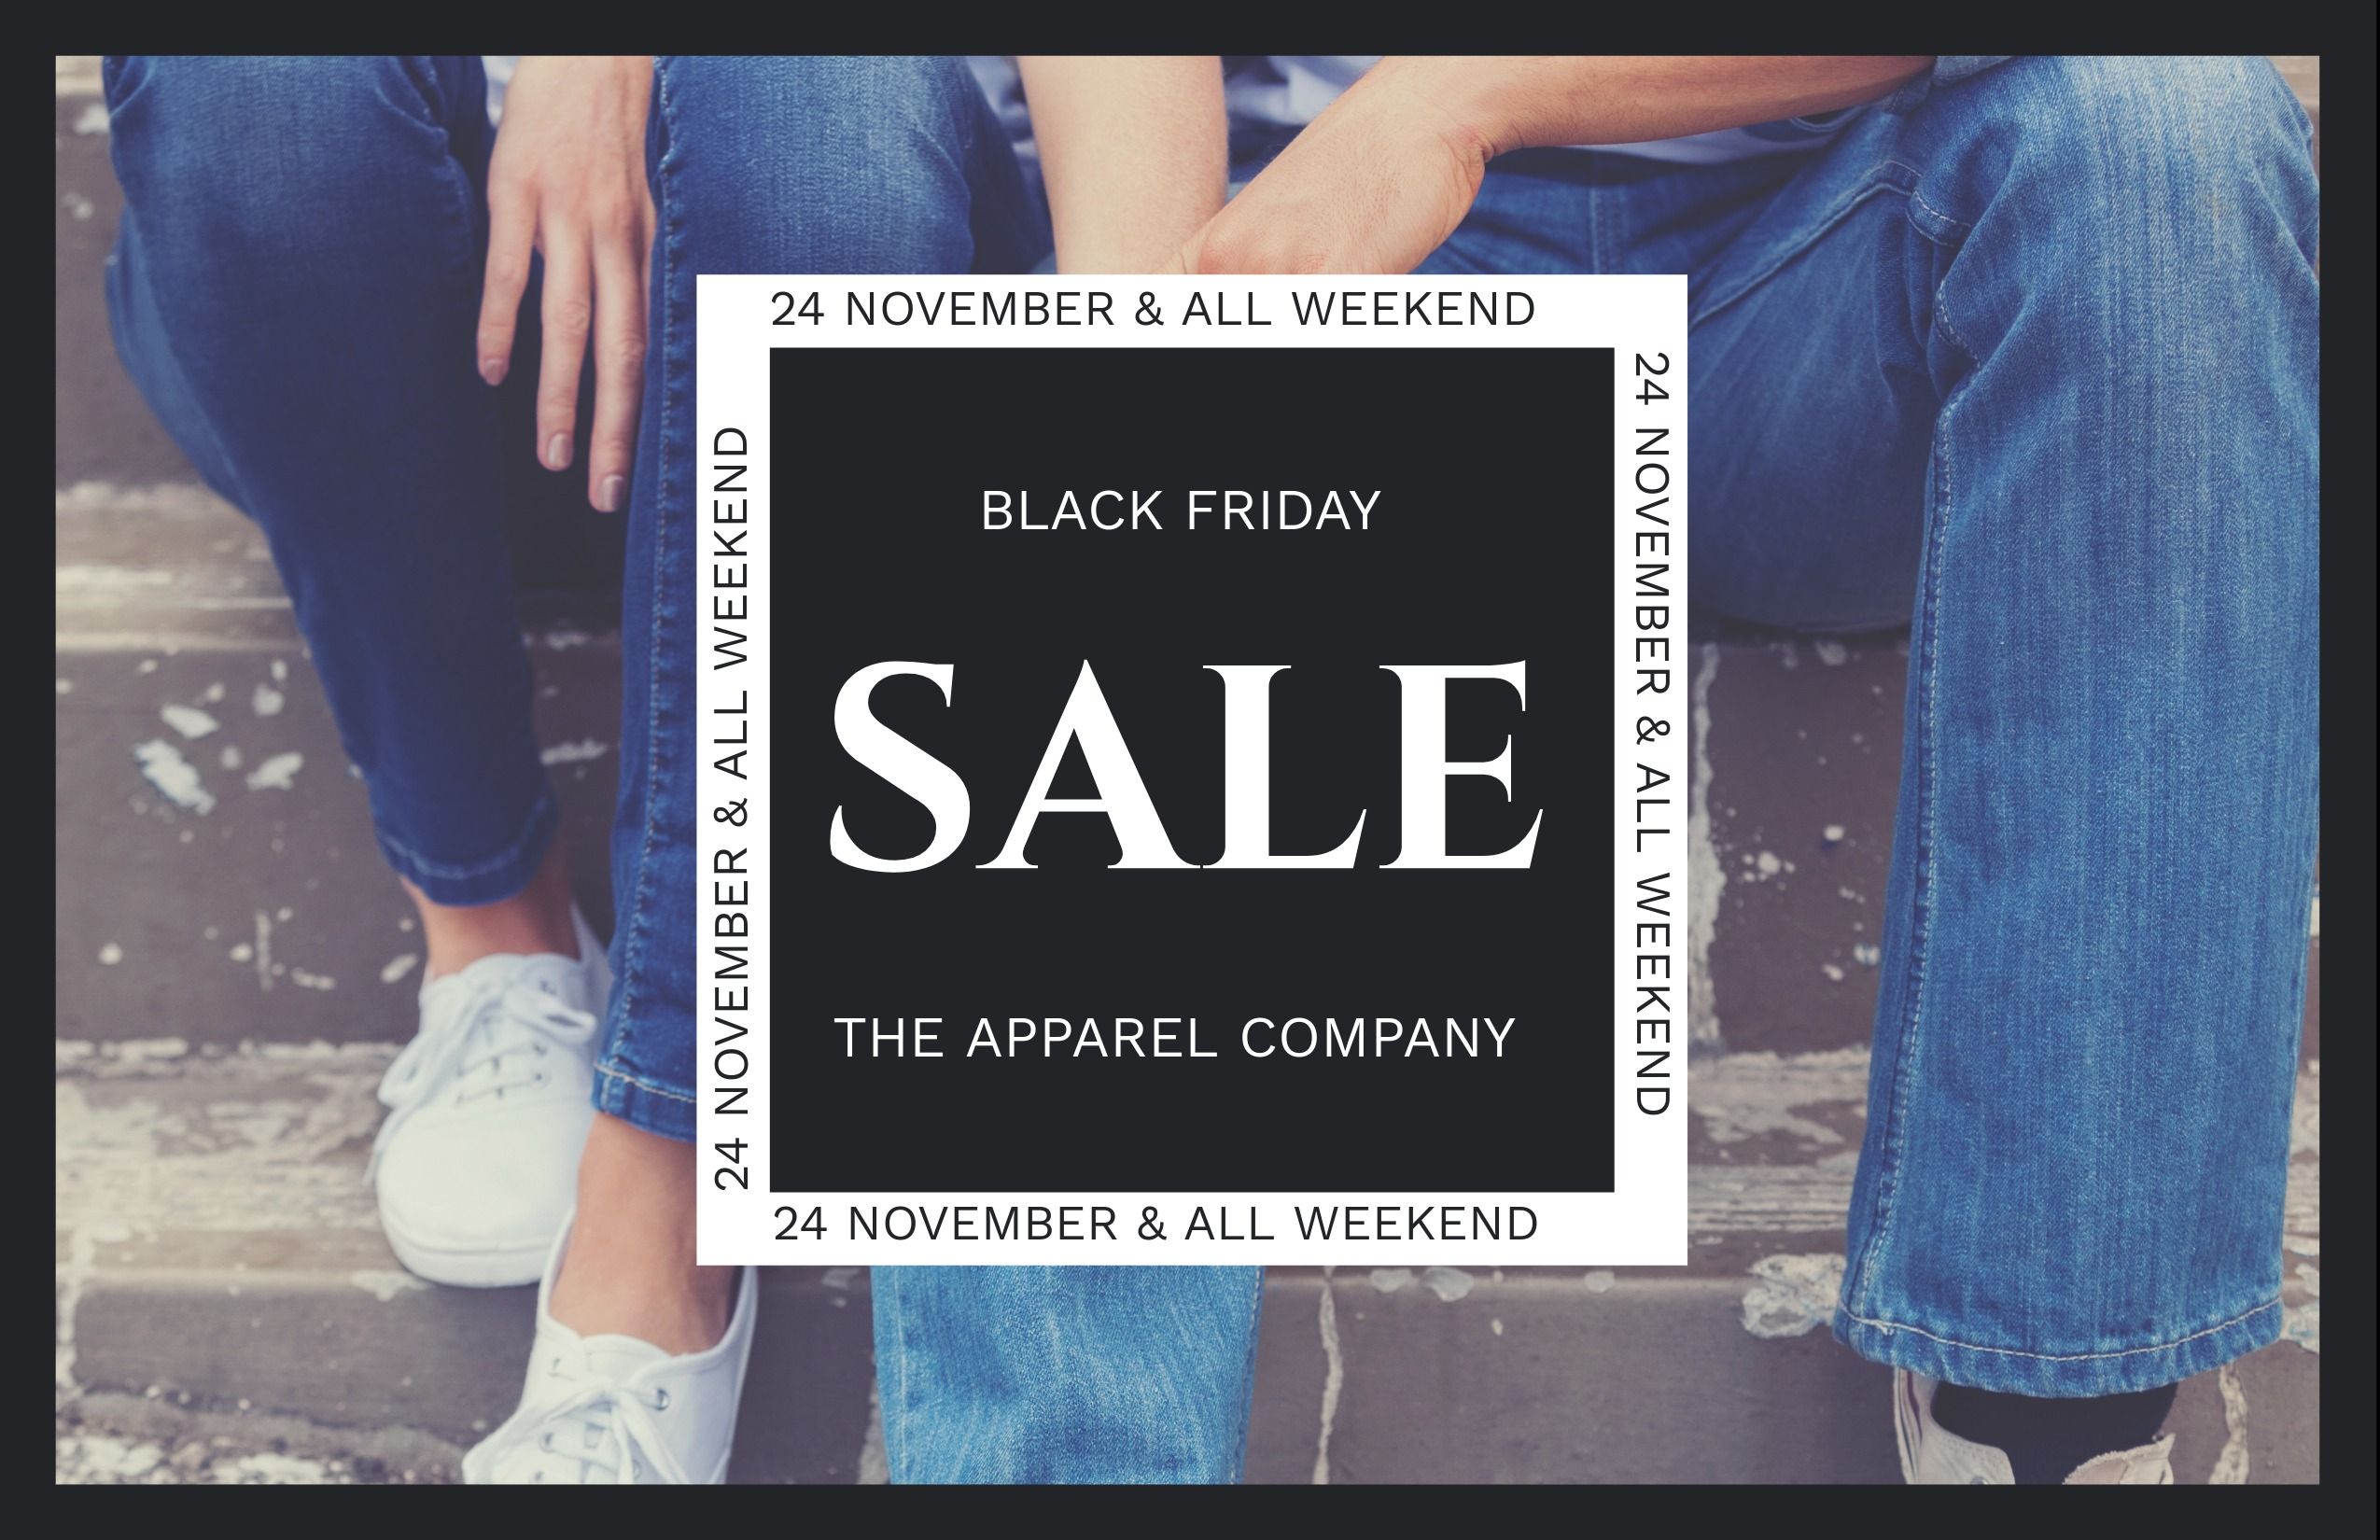 Black Friday ad sale design - 50 ideas and templates to use in your designs - Image